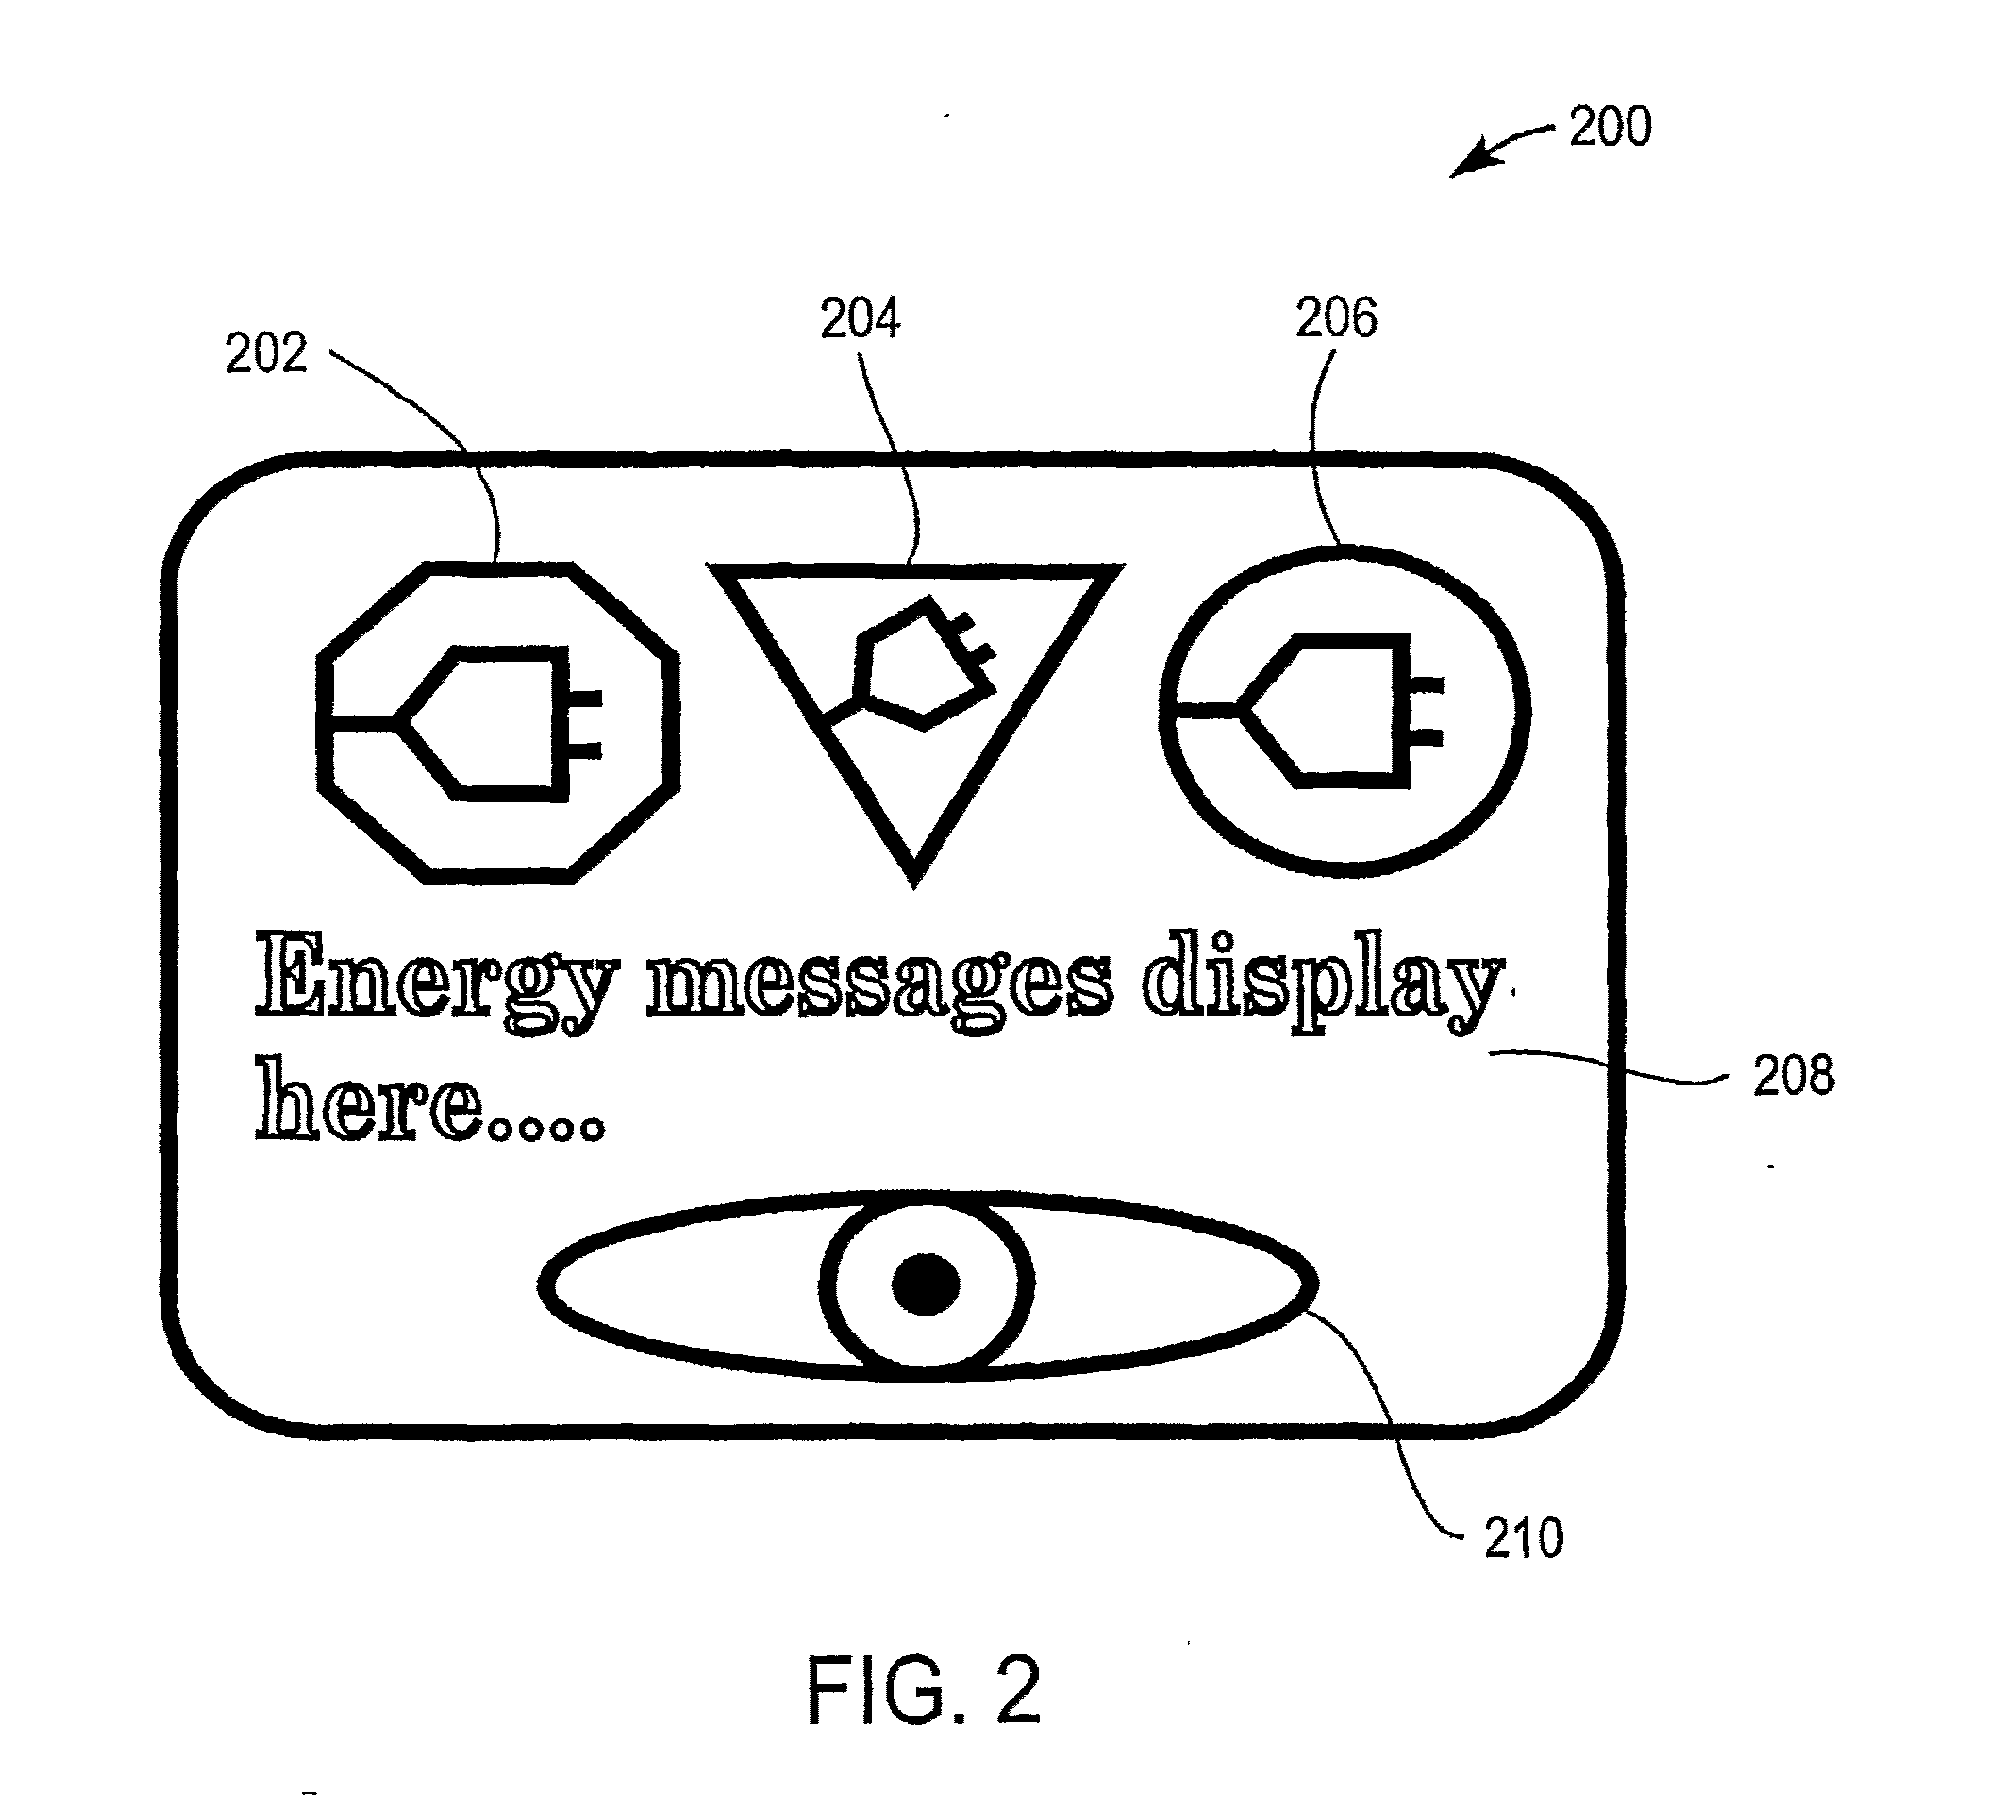 Systems and methods for modifying utility usage